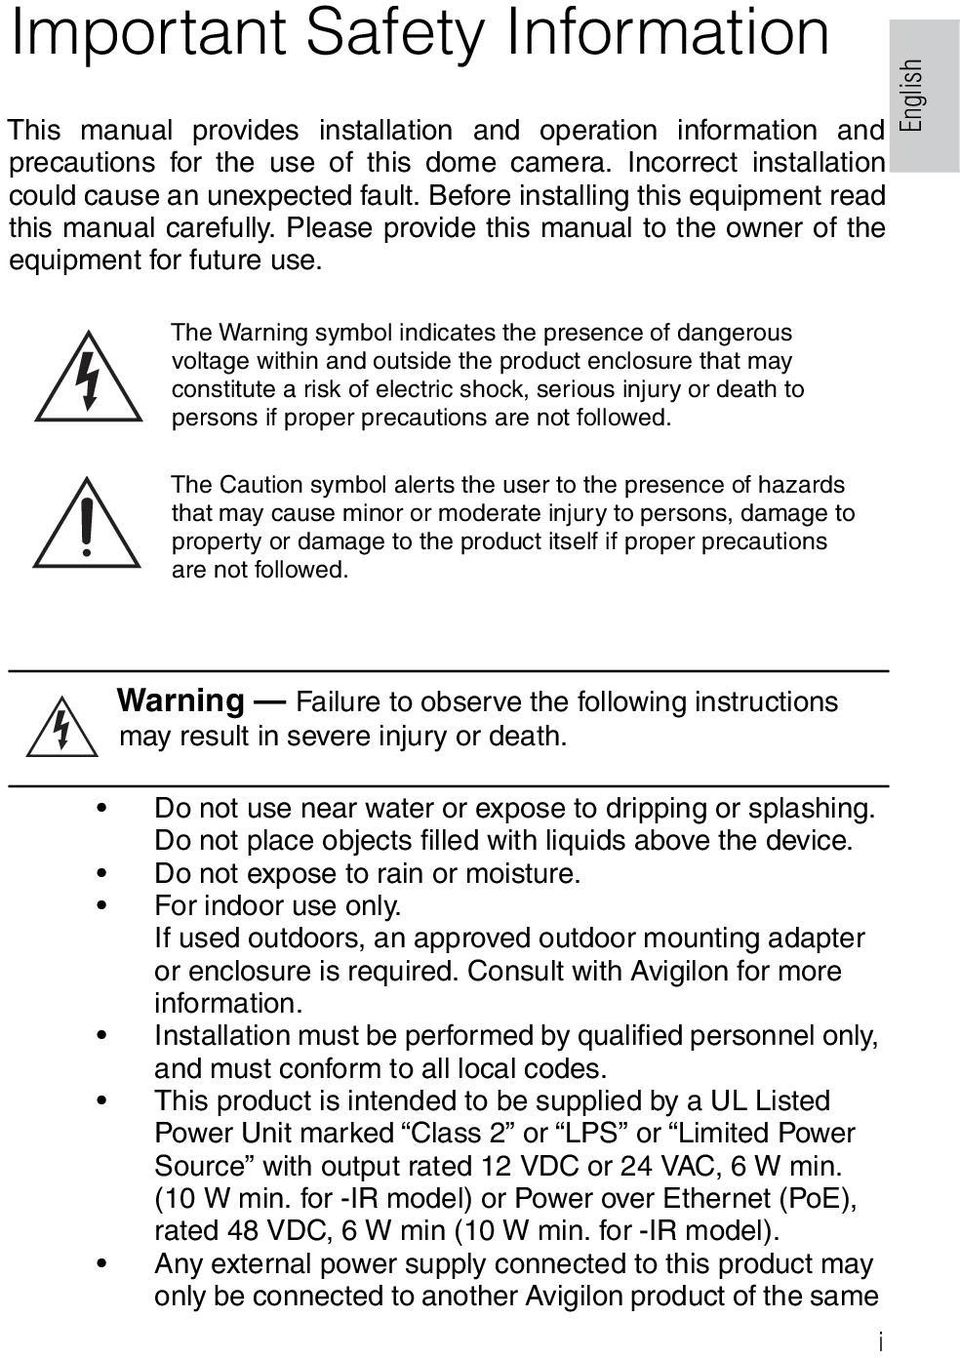 English The Warning symbol indicates the presence of dangerous voltage within and outside the product enclosure that may constitute a risk of electric shock, serious injury or death to persons if